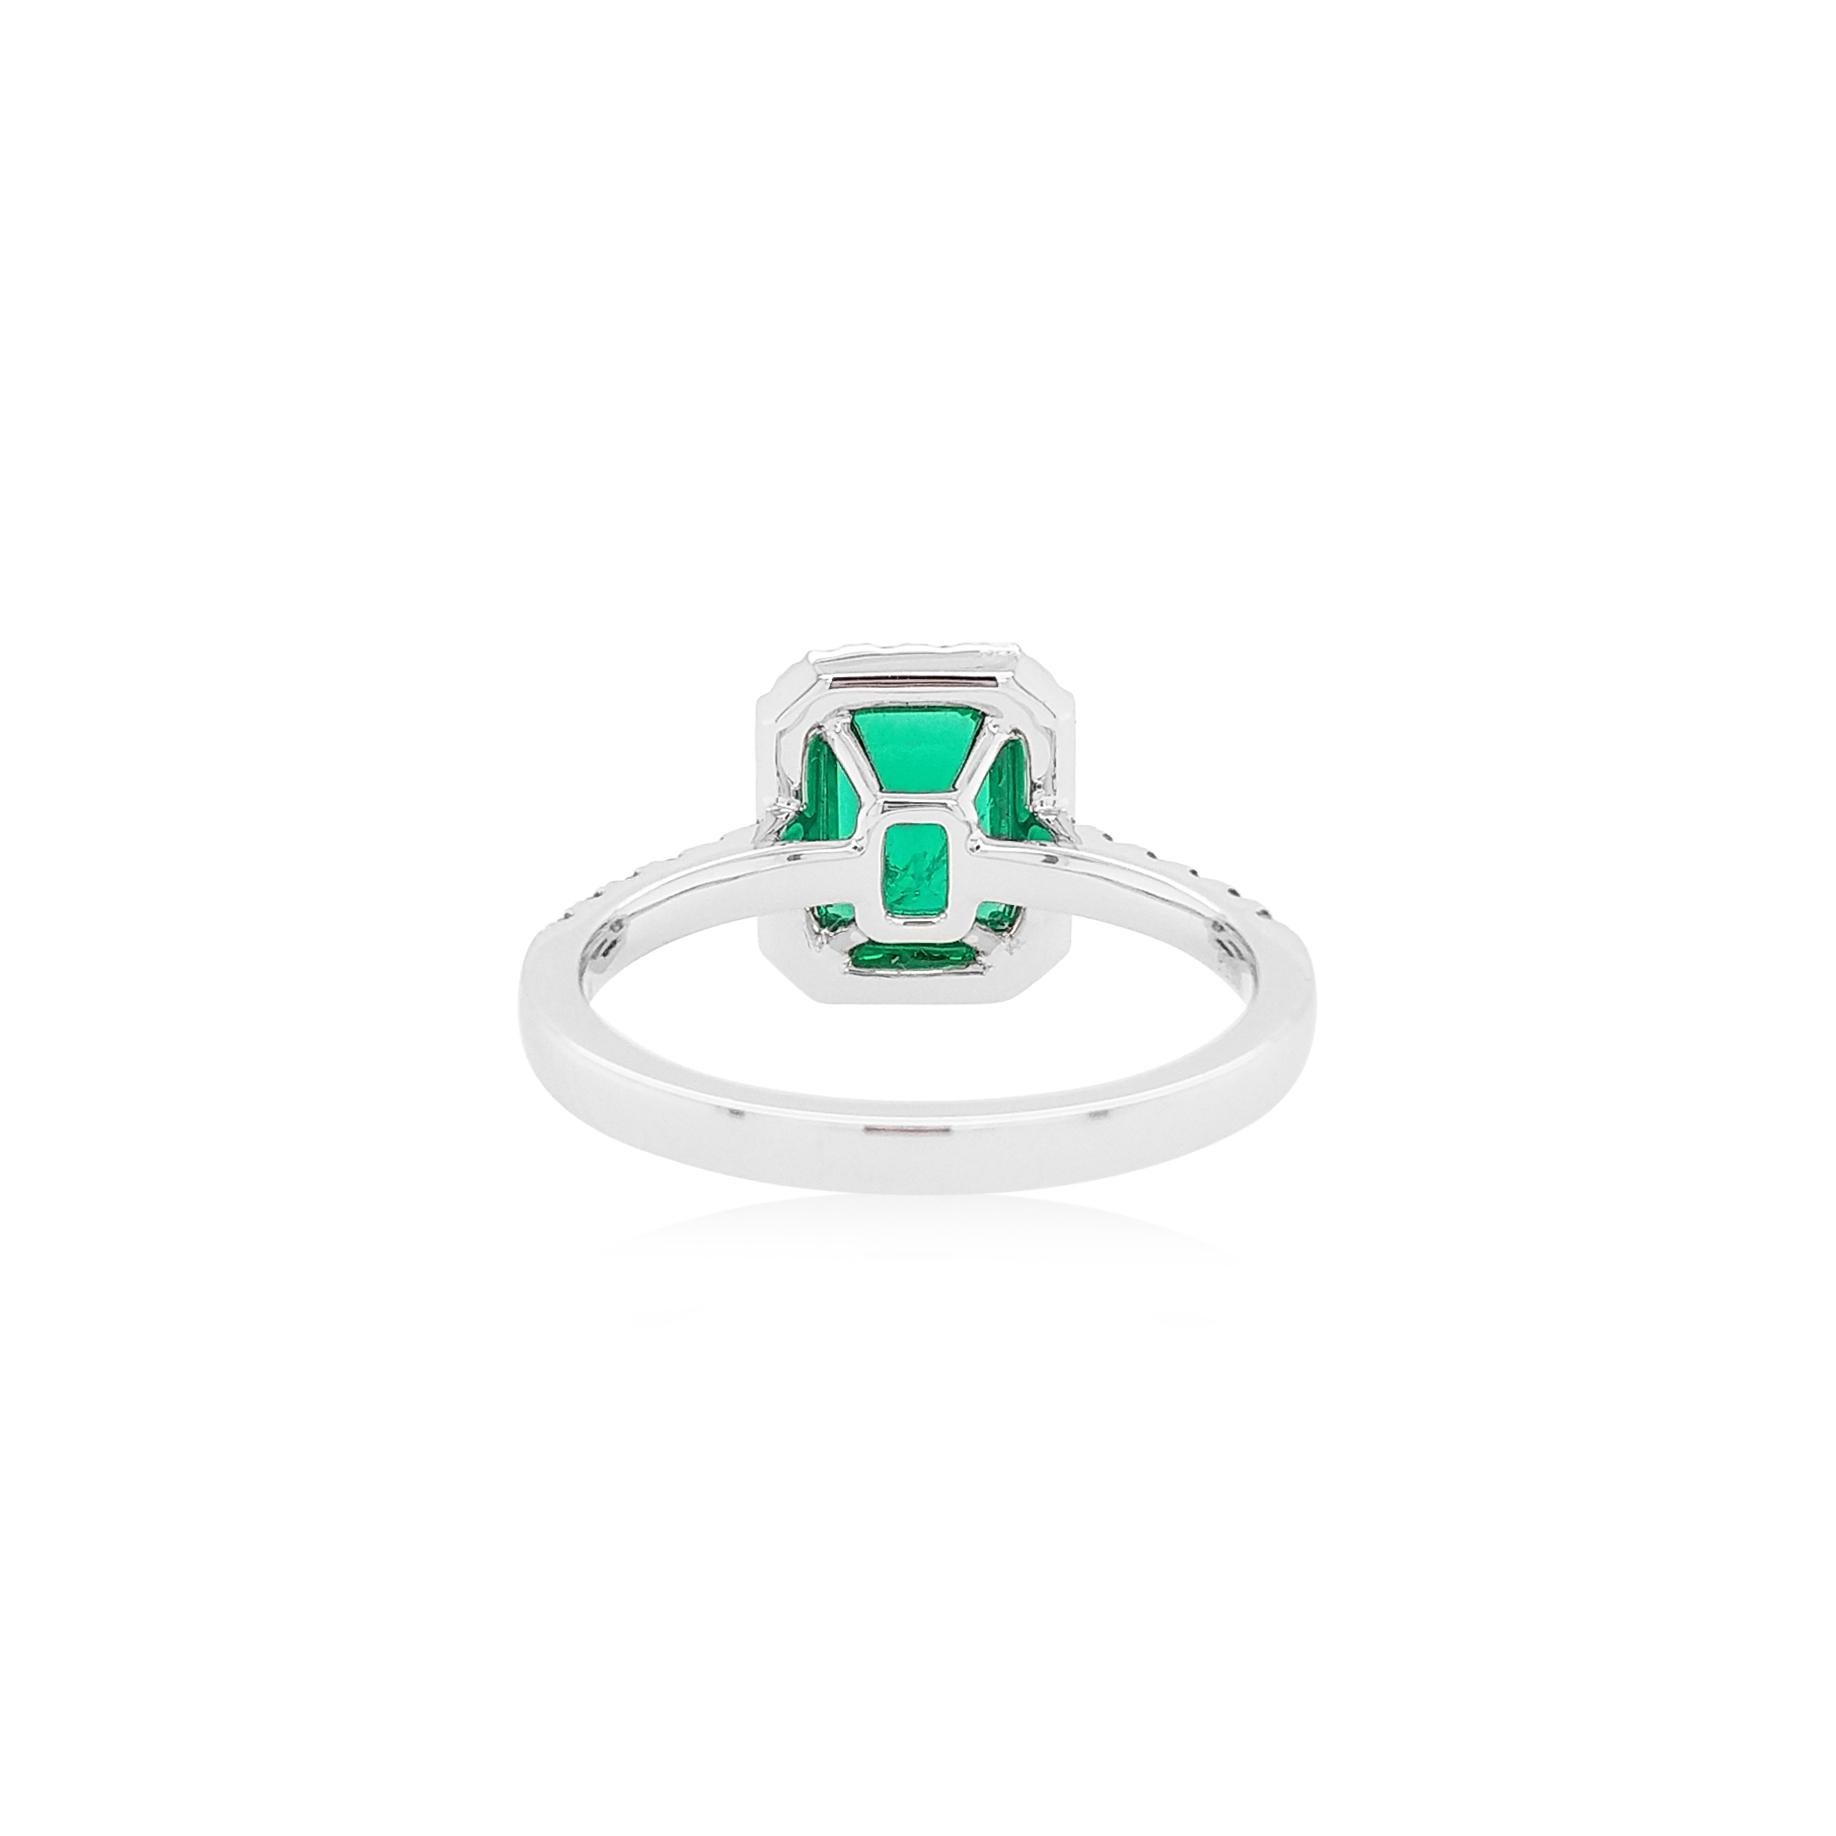 This elegant ring features vibrant Emerald-cut Colombian Emerald at its forefront, with a delicate white diamond halo surrounding them. Set in platinum to enrich the spectacular hues of the emerald and the sparkle of the diamonds, this ring utilizes